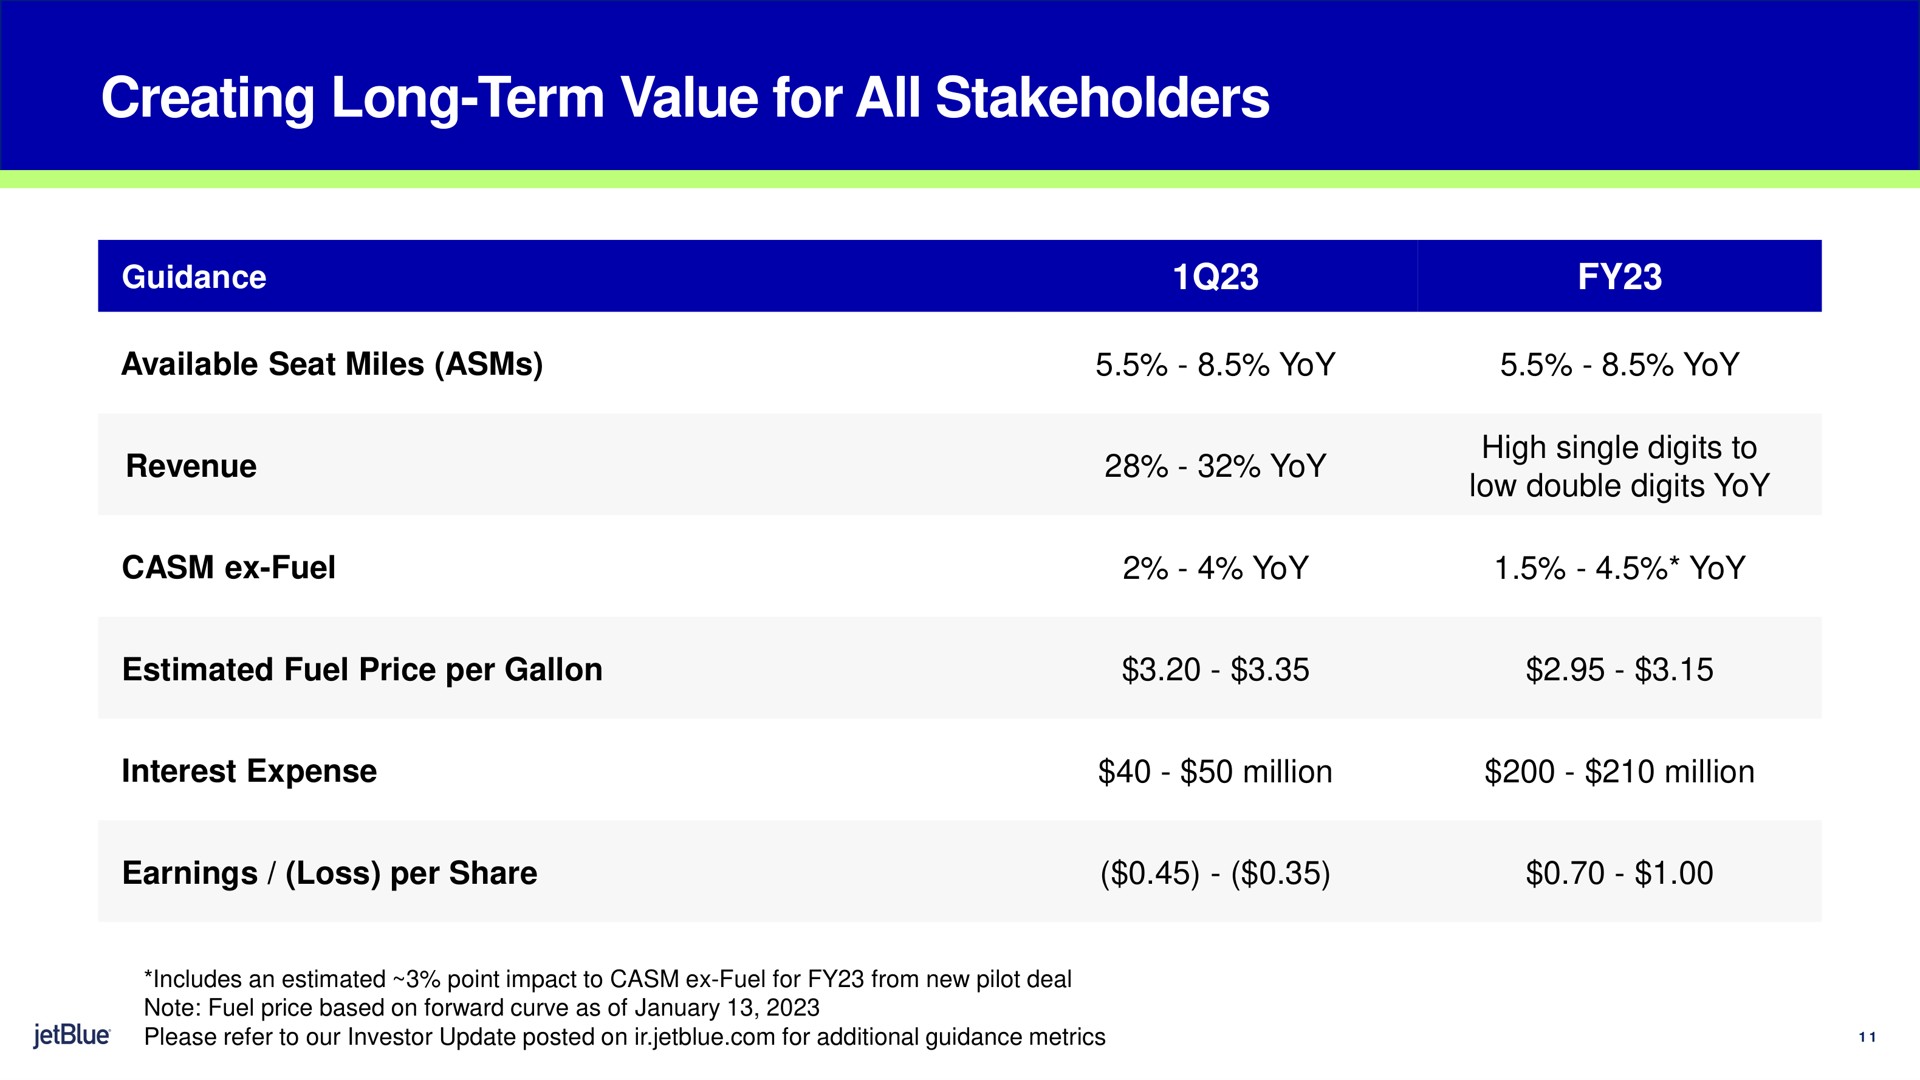 creating long term value for all stakeholders guidance available seat miles yoy yoy revenue fuel yoy high single digits to low double digits yoy yoy yoy estimated fuel price per gallon interest expense million million earnings loss per share | jetBlue